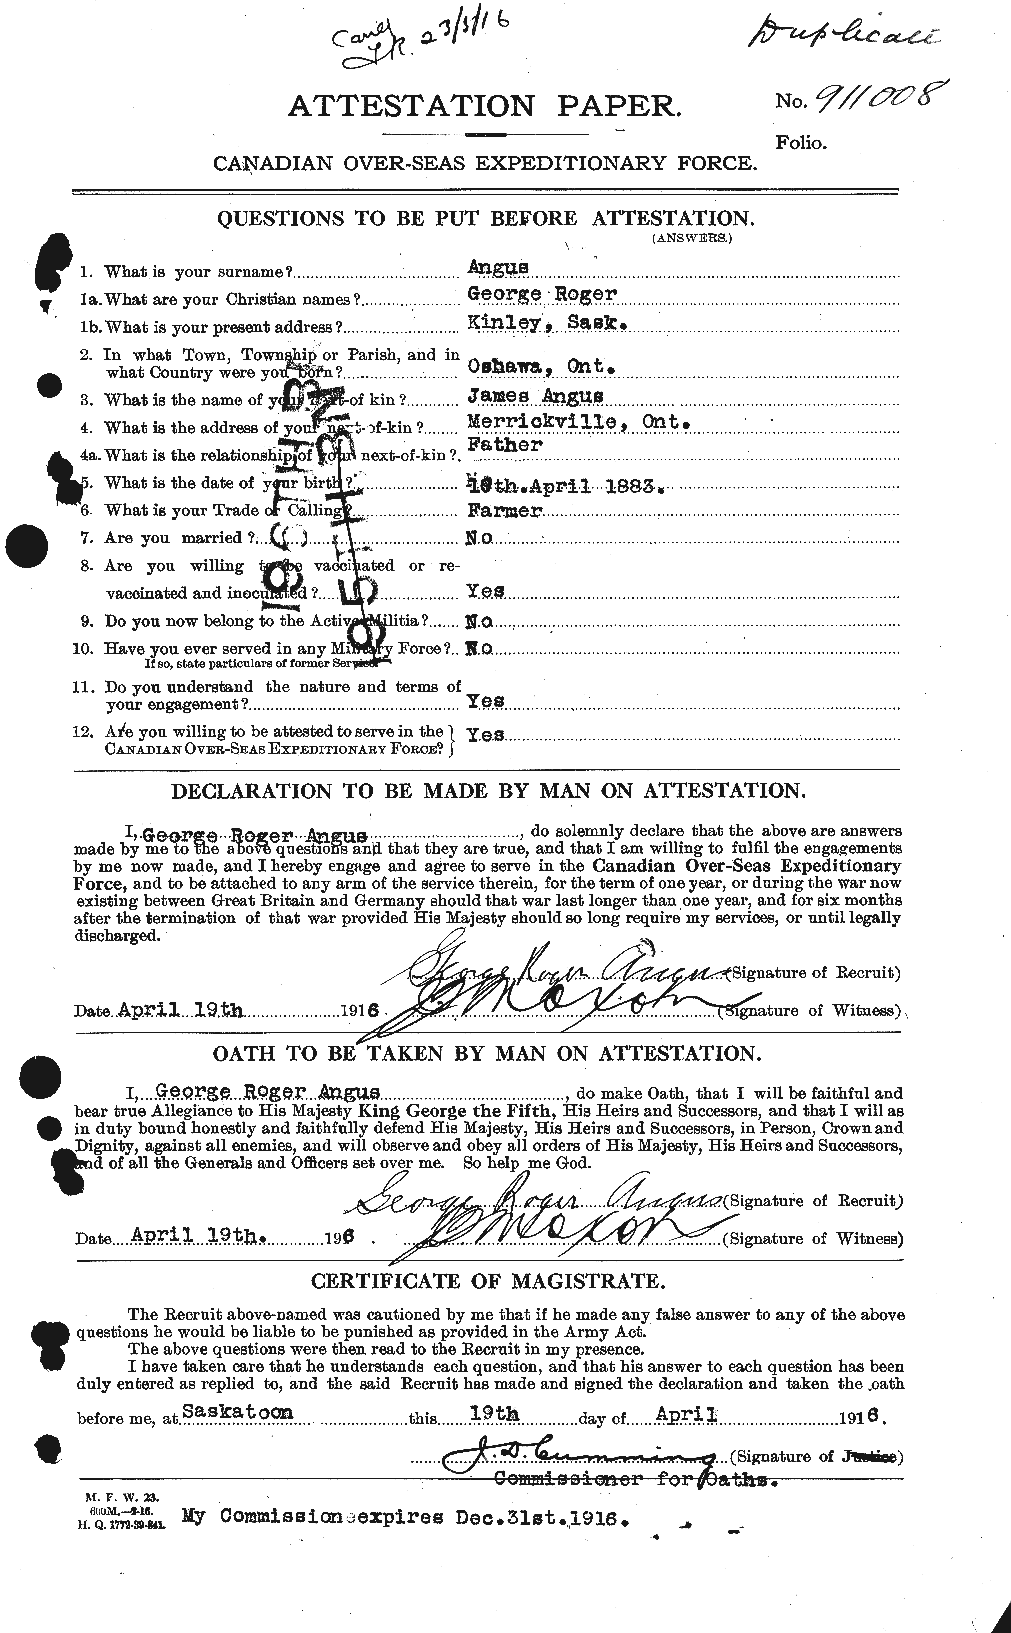 Personnel Records of the First World War - CEF 209089a